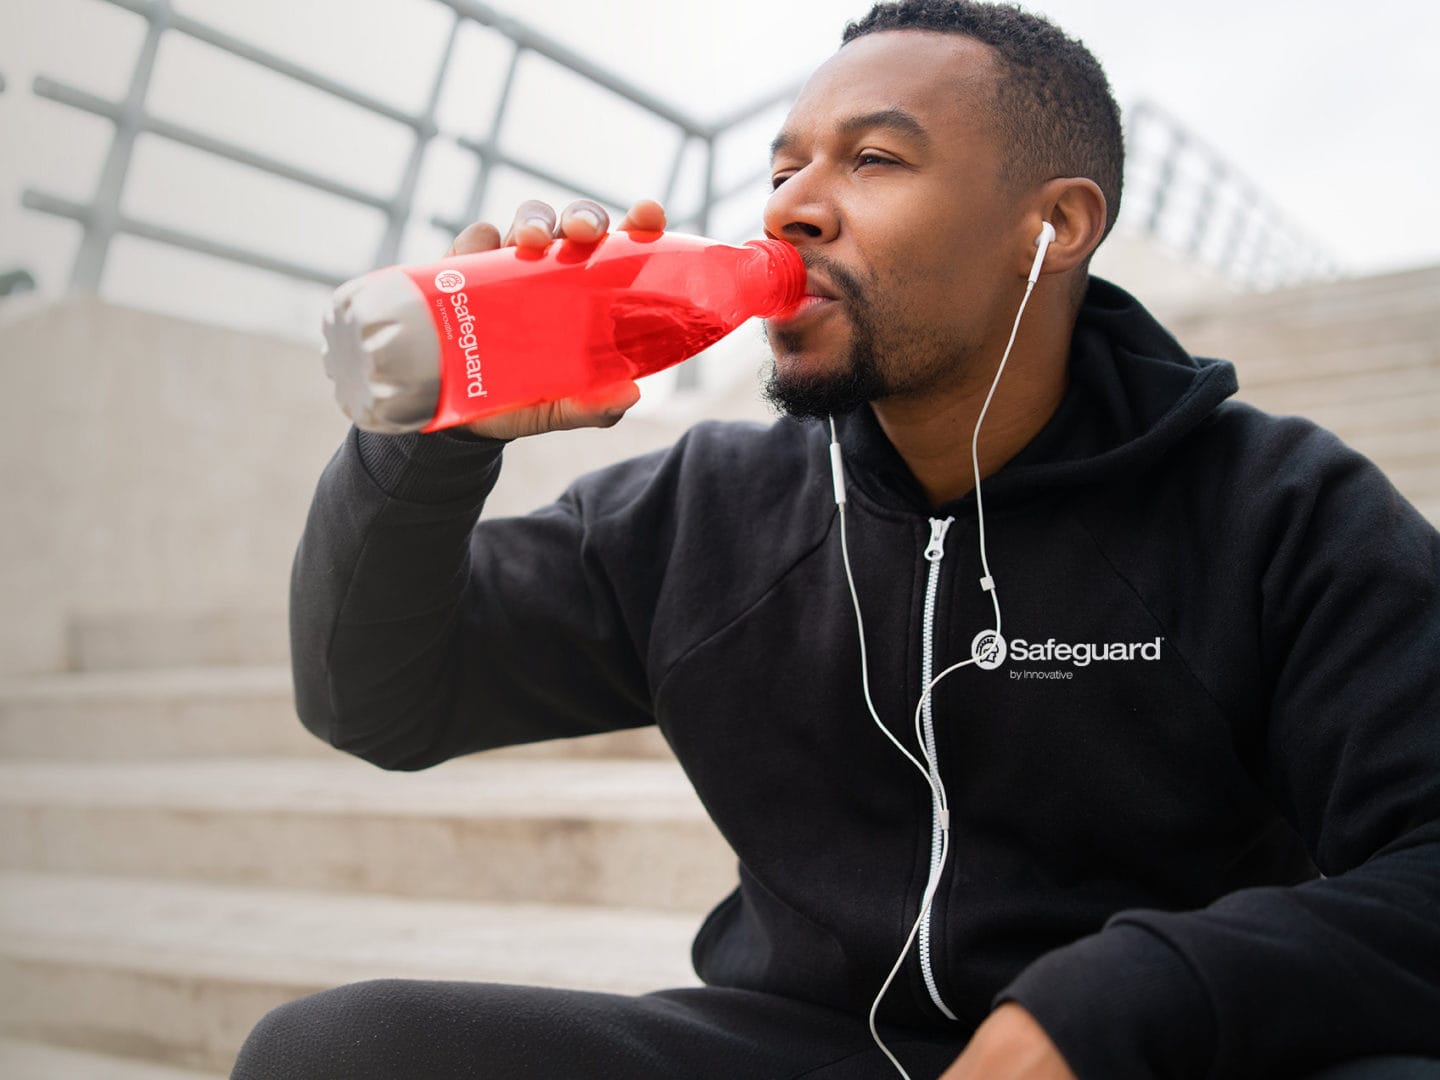 Man sitting on stairs outside drinking out of a red Safeguard branded water bottle.